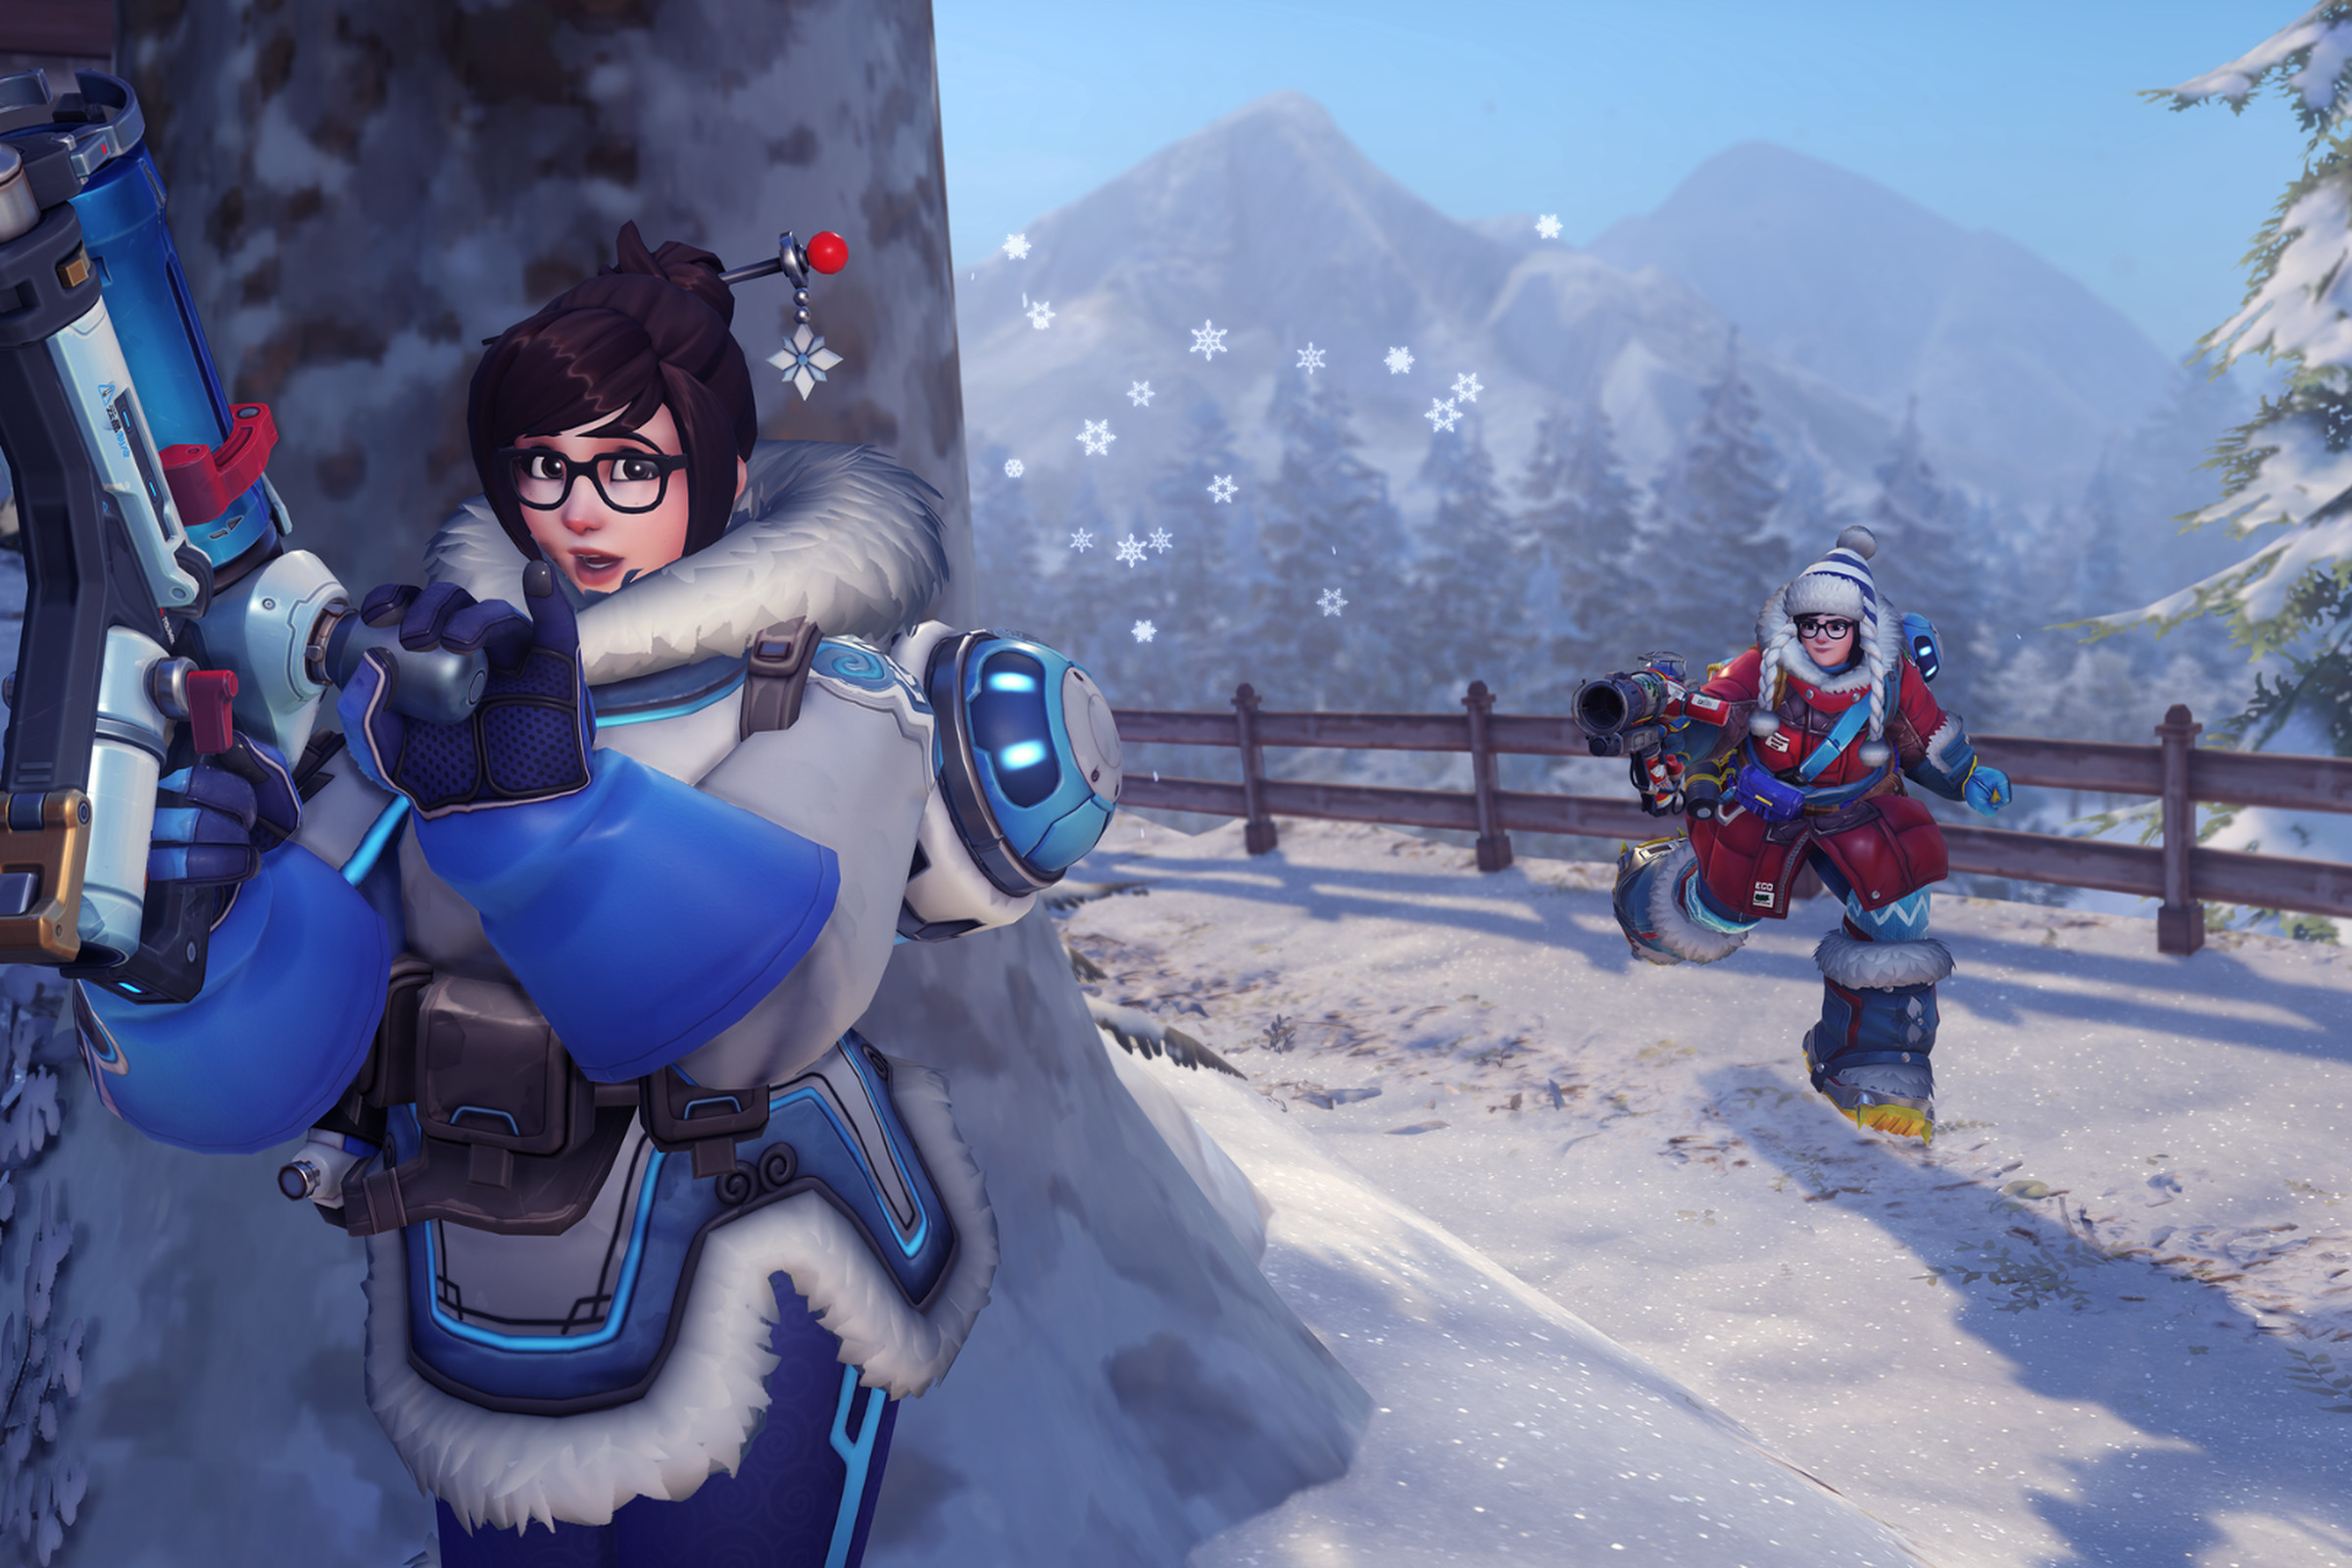 Screenshot from Mei’s Snowball Challenge featuring one Mei sneaking up behind another Mei to attack.